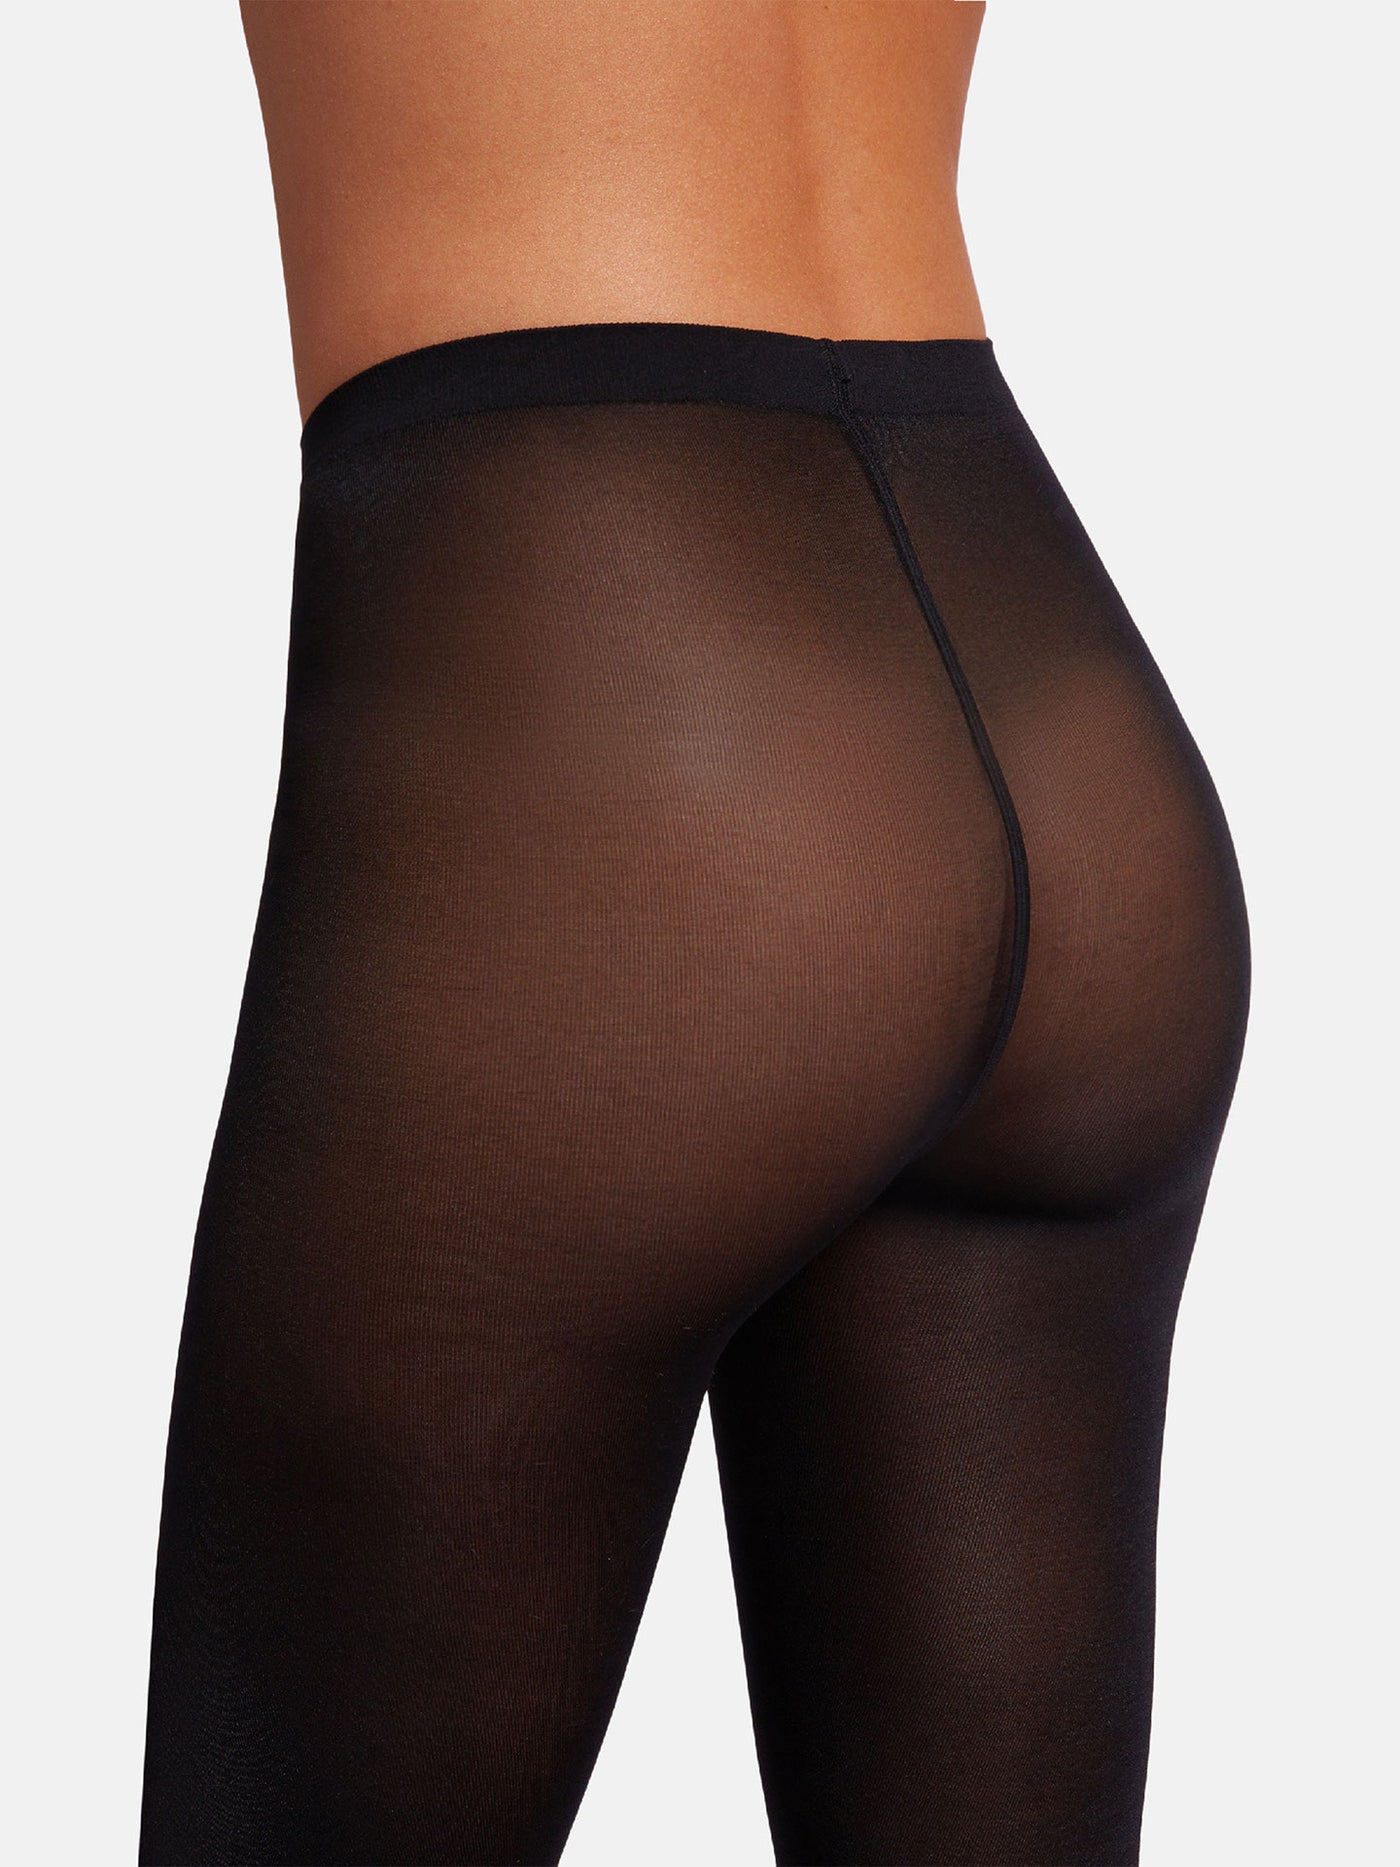 Wolford Satin Opaque 50 Black